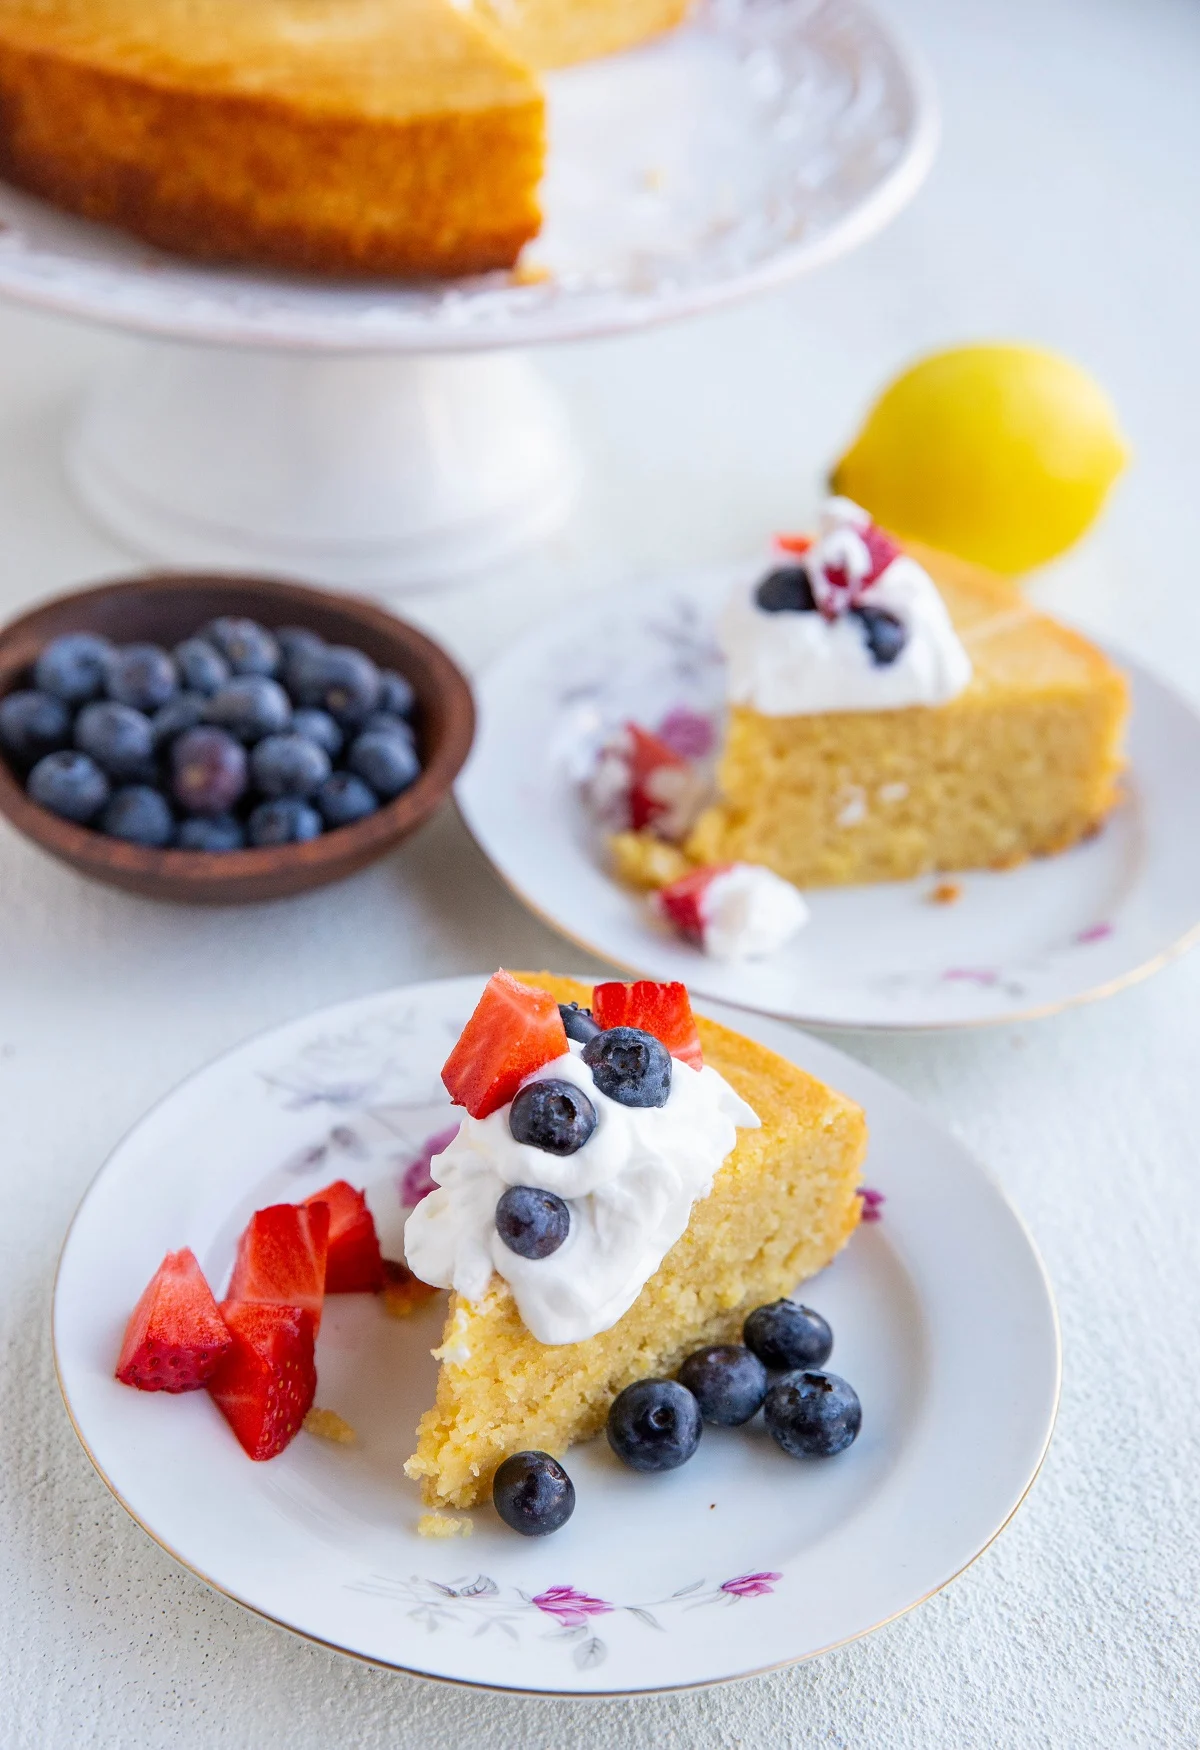 Two slices of lemon cake on plates with whipped cream on top and berries.